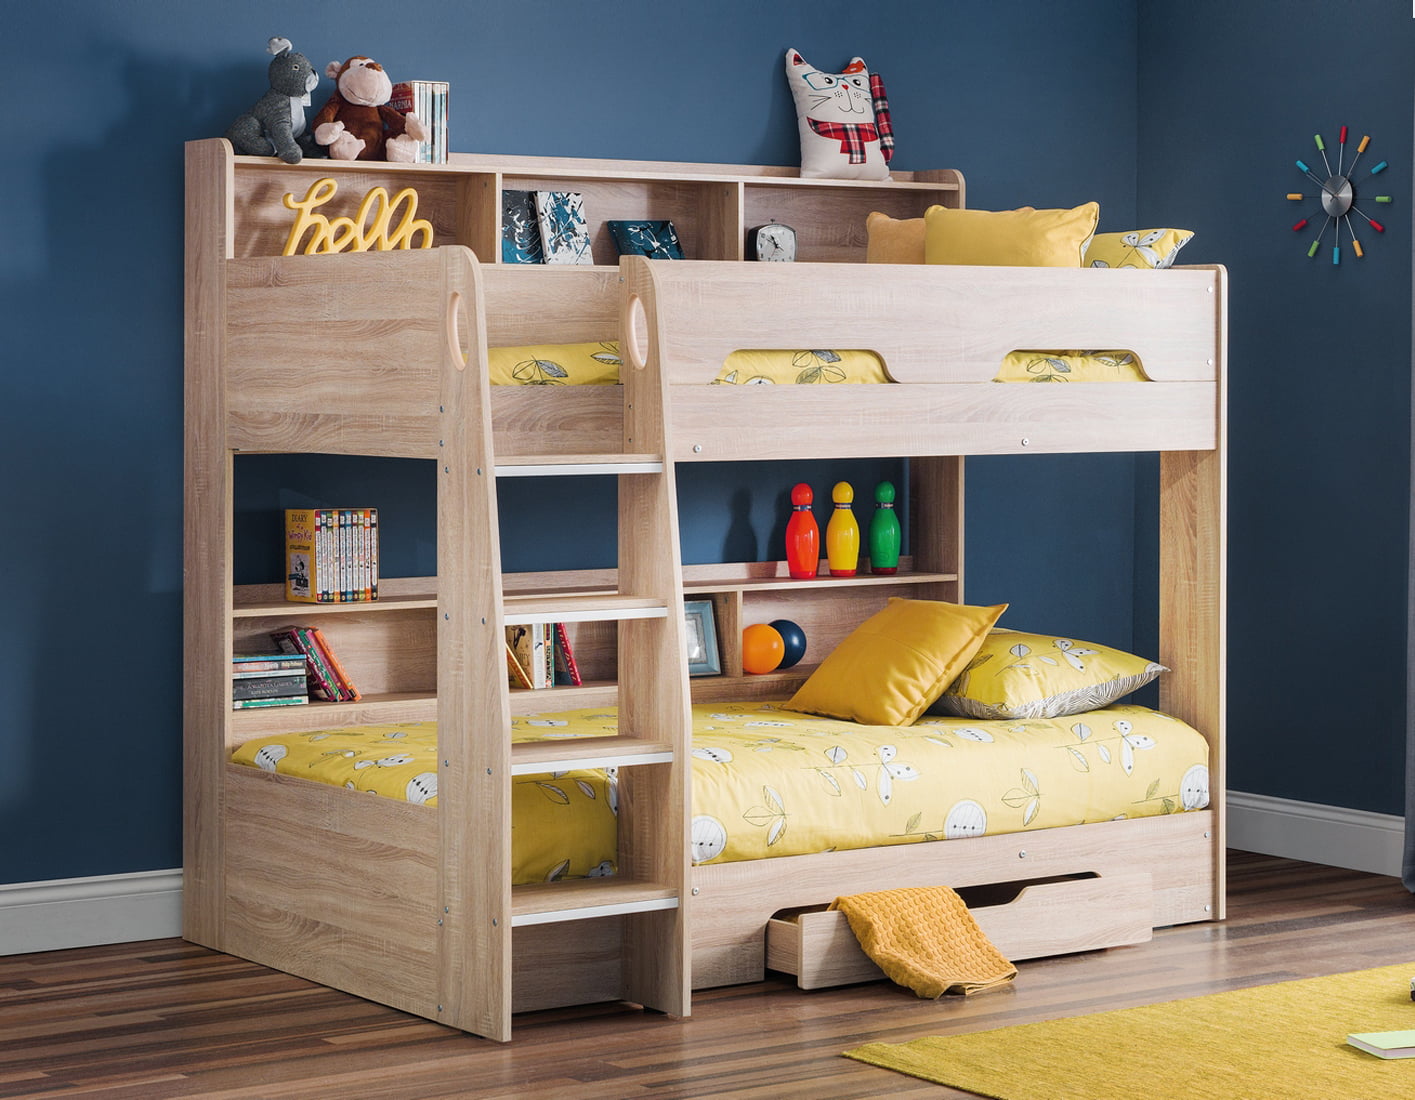 Orion Bunk Bed In Oak With, Bunk Beds With Shelves